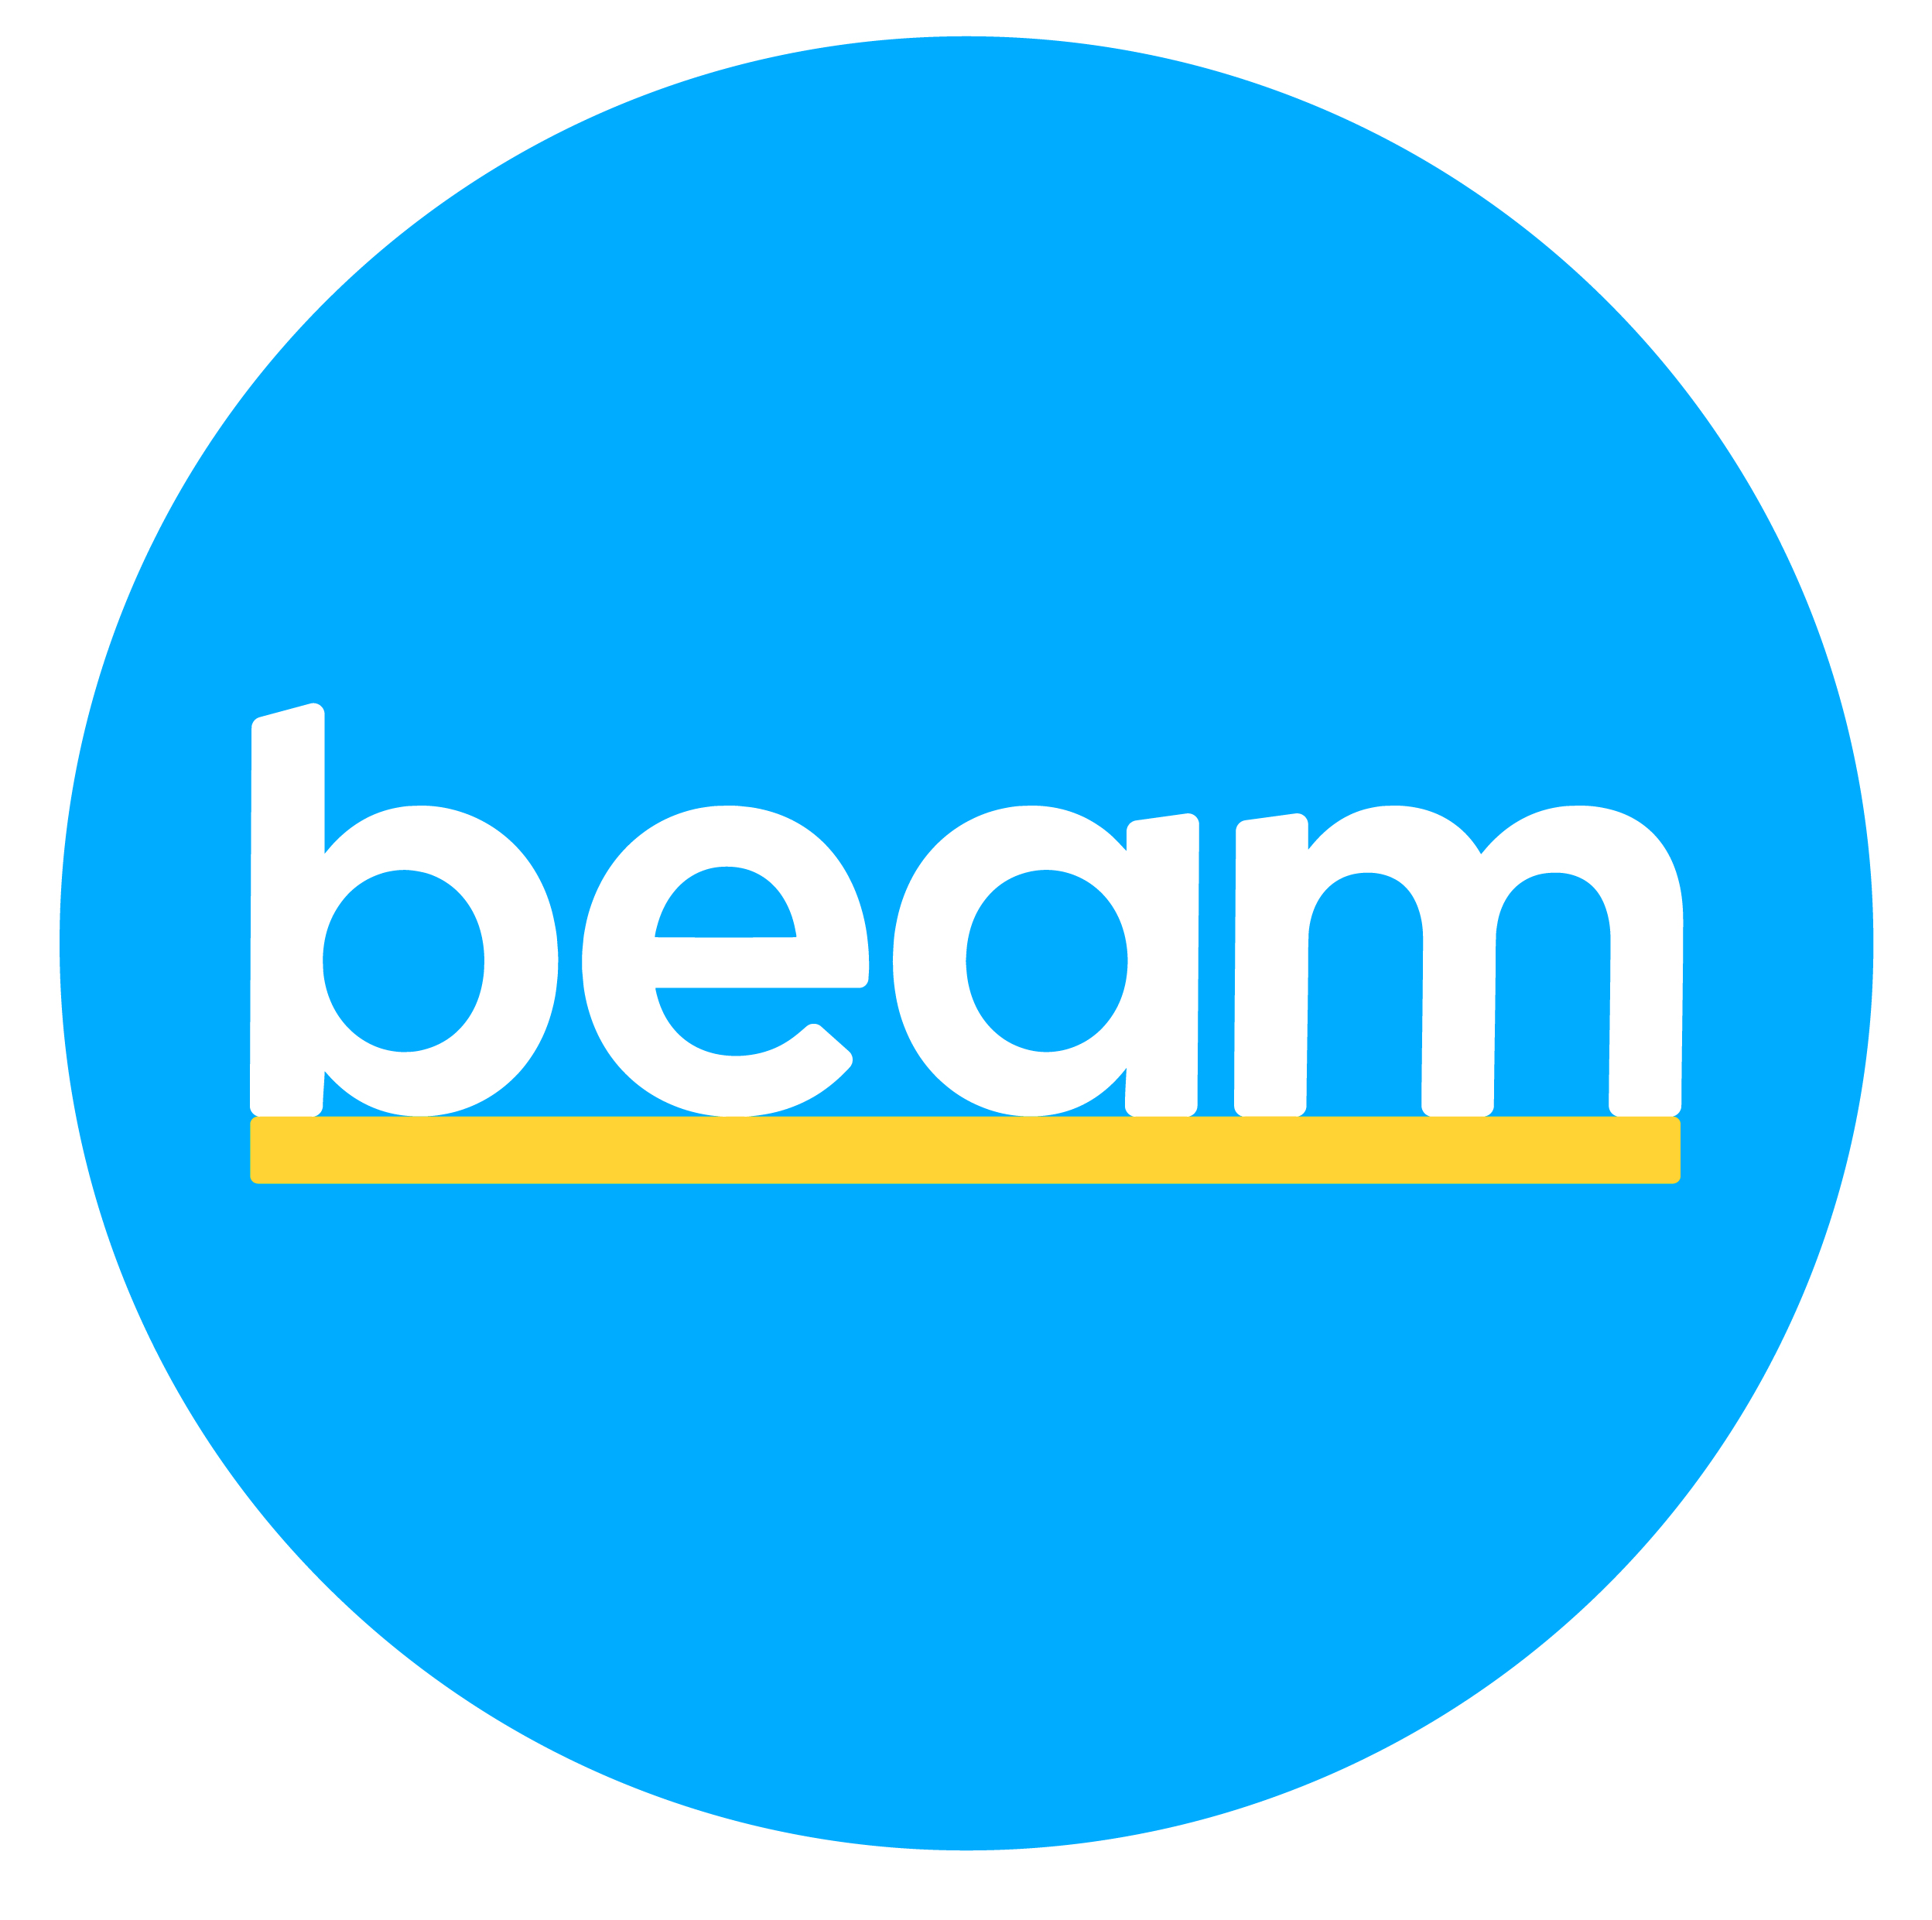 Beam is a social enterprise that supports homeless people, refugees and prison leavers to access jobs, homes and skills. Through Beam's crowdfunding platform, individuals and companies can read the stories of people who want to turn their lives around, donate directly towards their goals and send them encouraging messages. Since launching in 2017, Beam has fundraised more than £4.5 million, 100% of which is used to remove the barriers facing the most disadvantaged in our society. In doing so, Beam has helped more than 2,000 people to find jobs and homes, enabling them to leave homelessness for good and build brighter futures. For more on Beam's impact, go to: https://beam.org/company-impact